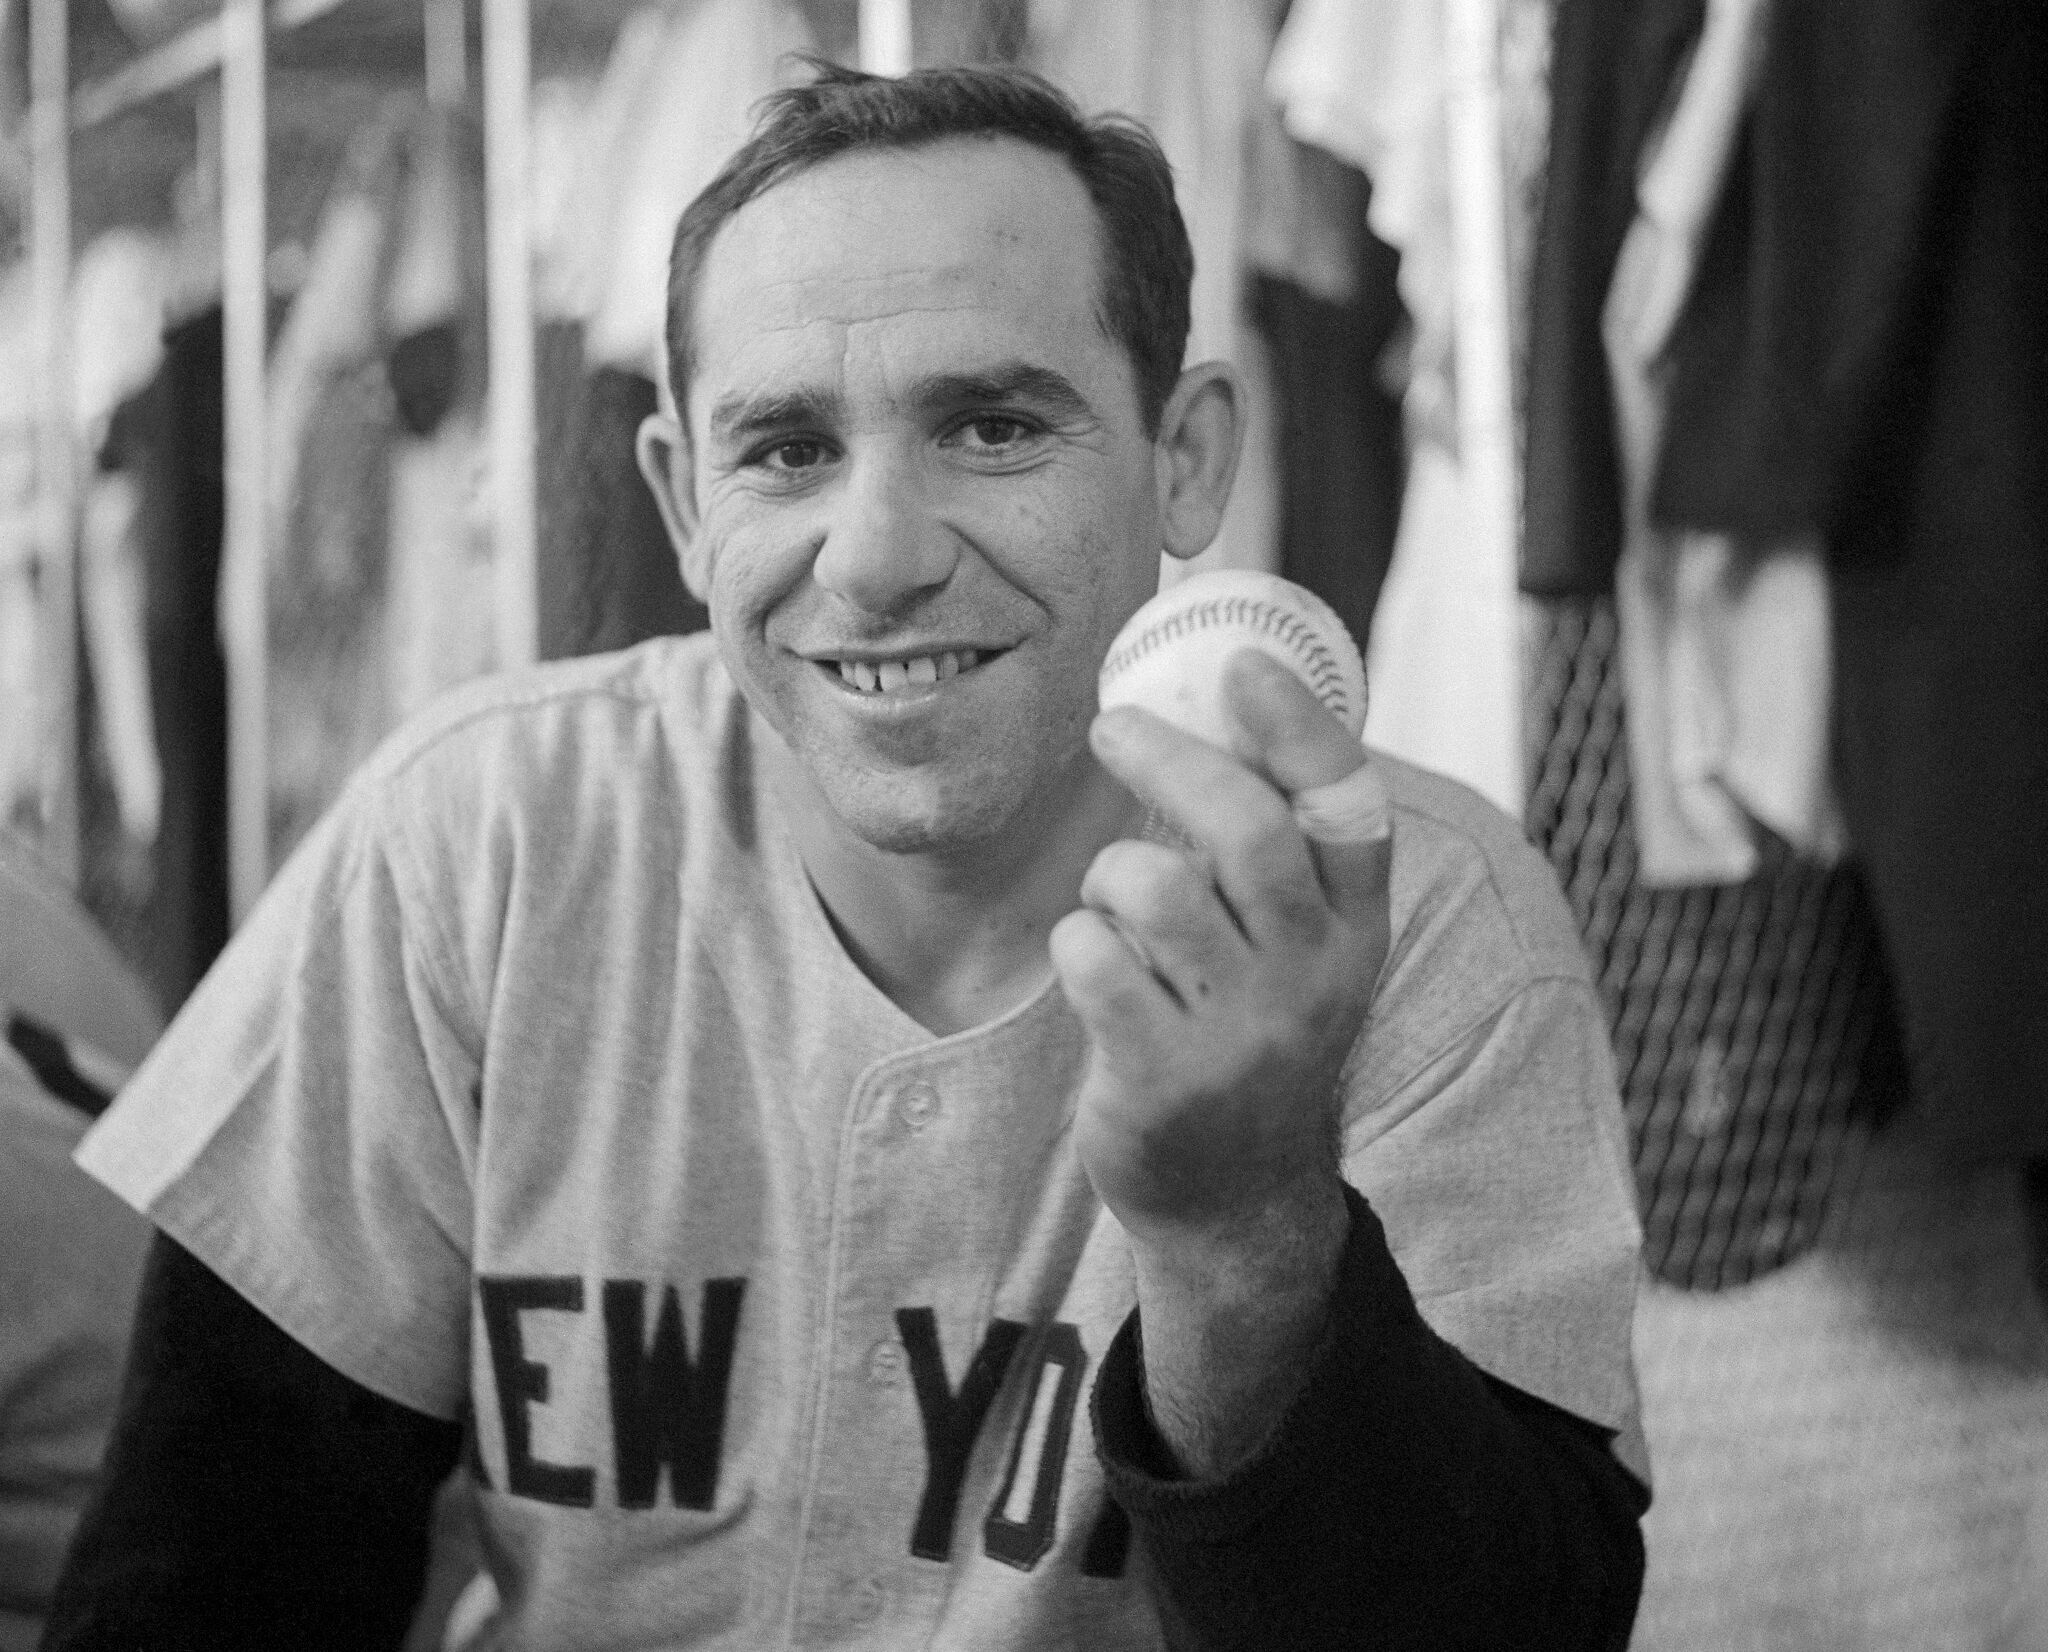 Review: Yogi Berra documentary, 'It Ain't Over' is powerful